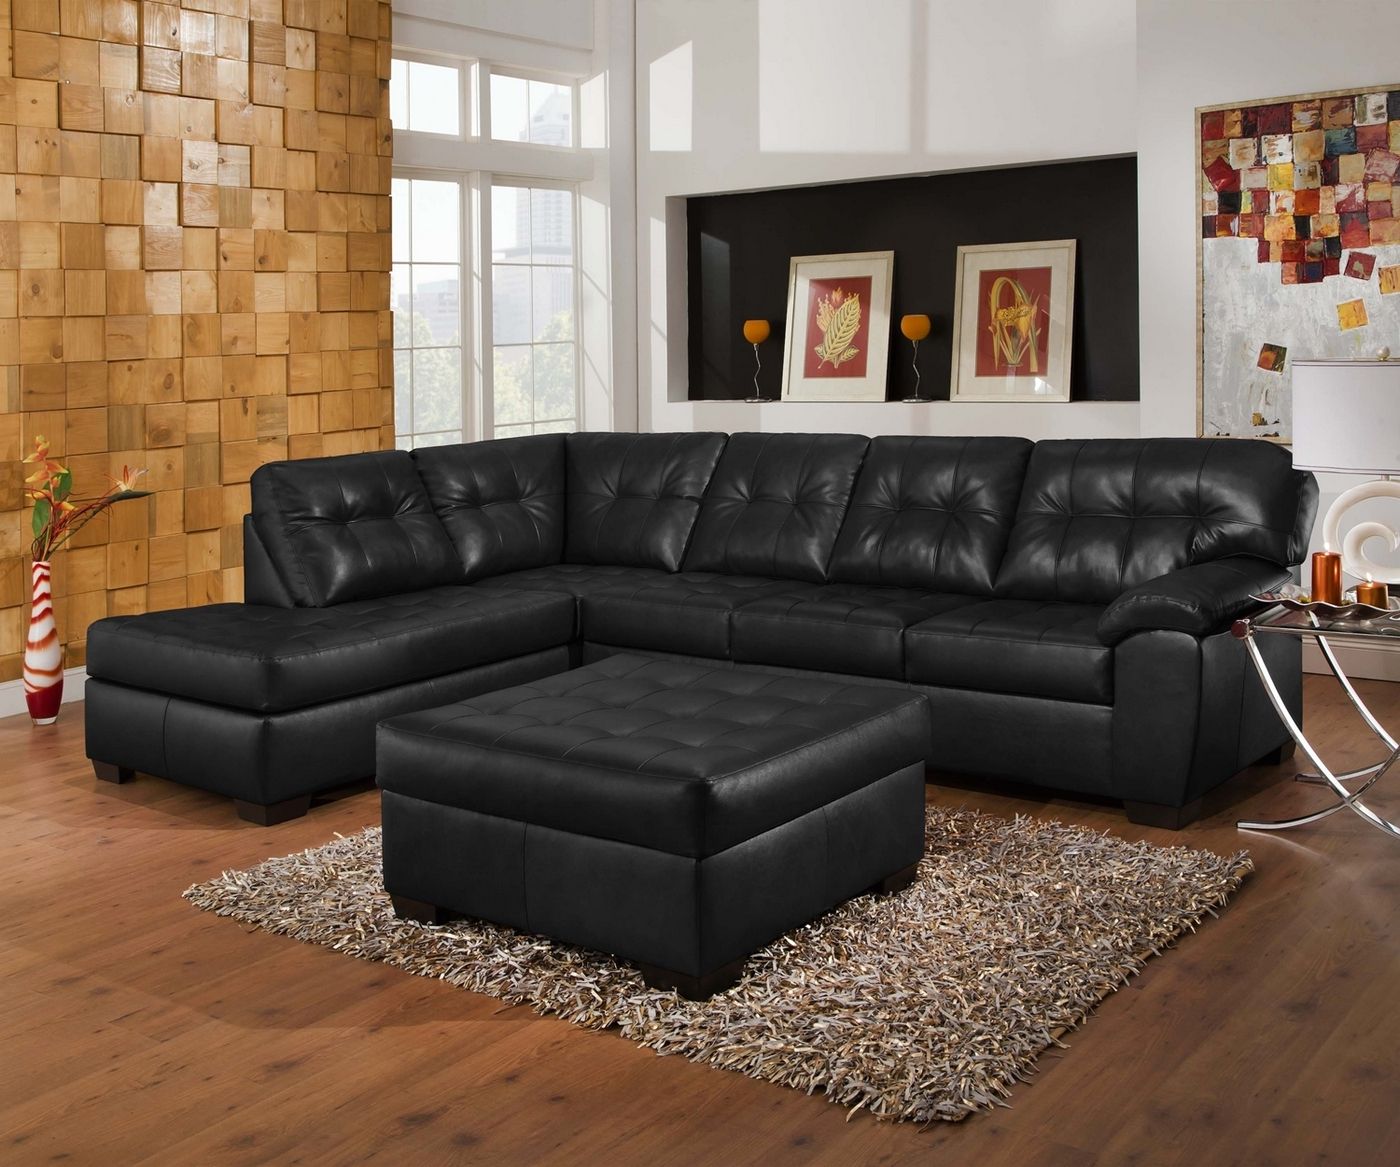 Soho Contemporary Onyx Leather Sectional Sofa W/ Left Chaise Regarding 2pc Connel Modern Chaise Sectional Sofas Black (View 10 of 15)